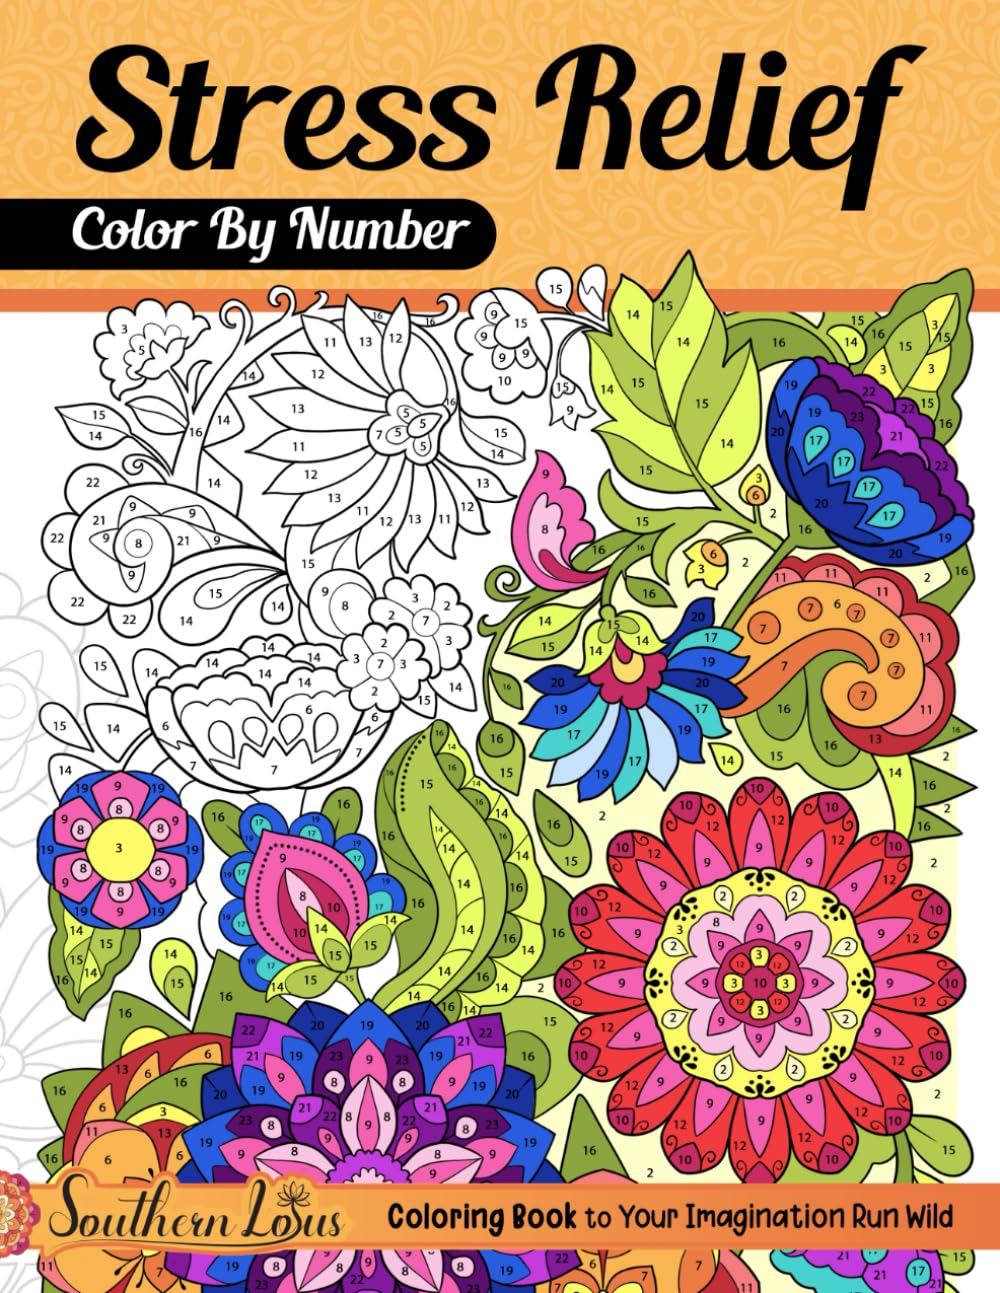 Color By Number Stress Relief: Coloring Book of Relaxing Drawings and Mindful Patterns with Detailed Color Palette, Large Print Pages For Adults Women Seniors to Relieve Anxiety